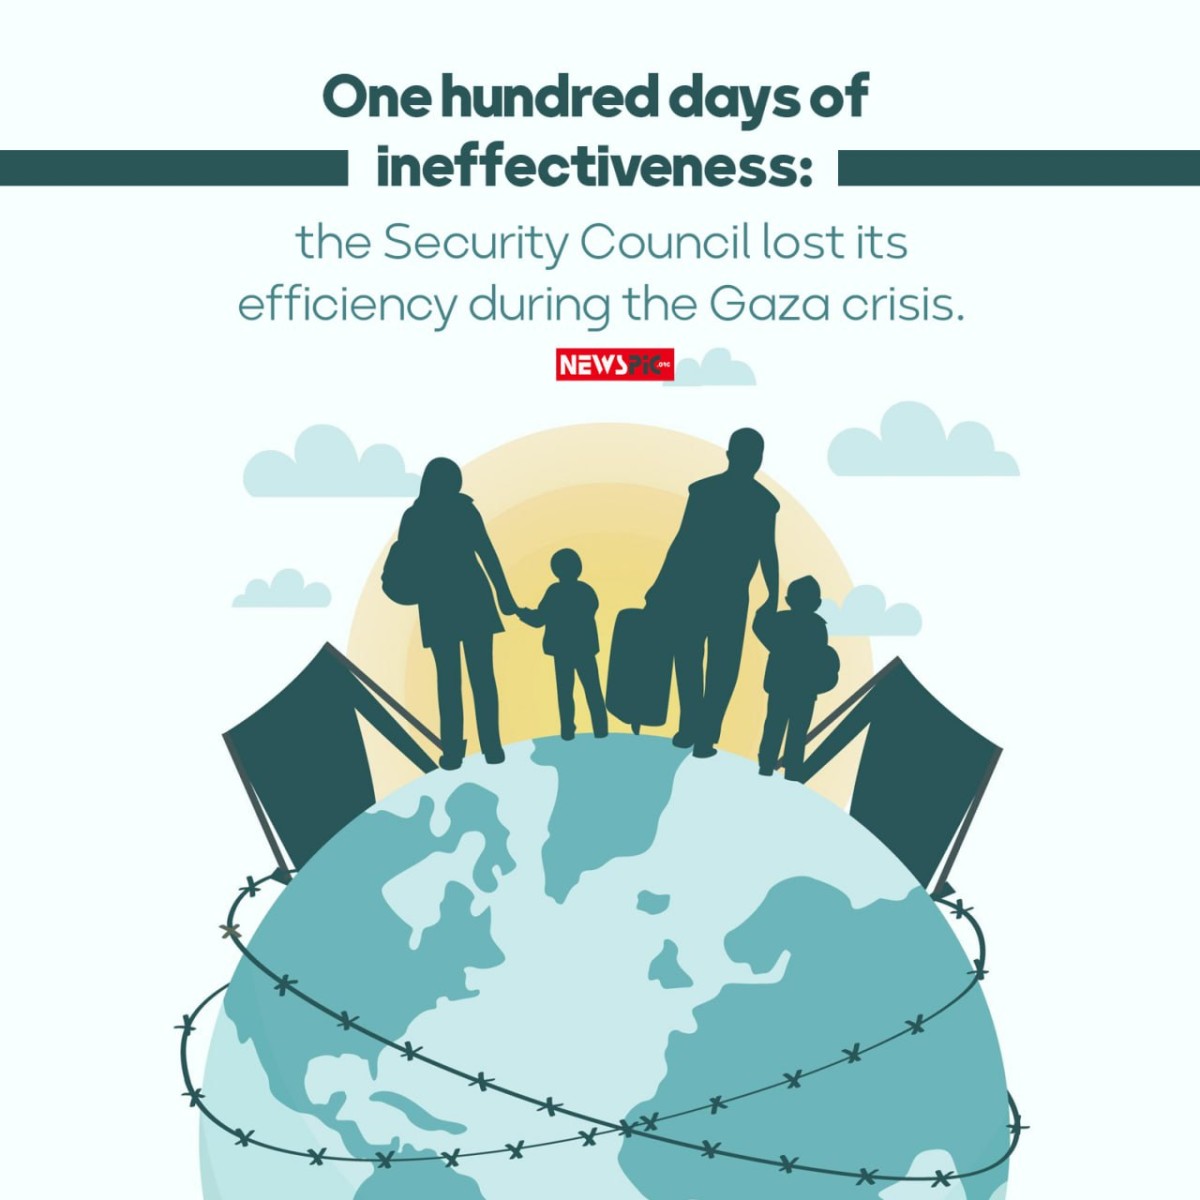 One hundred days of ineffectiveness: the Security Council lost its efficiency during the Gaza crisis. NEWS